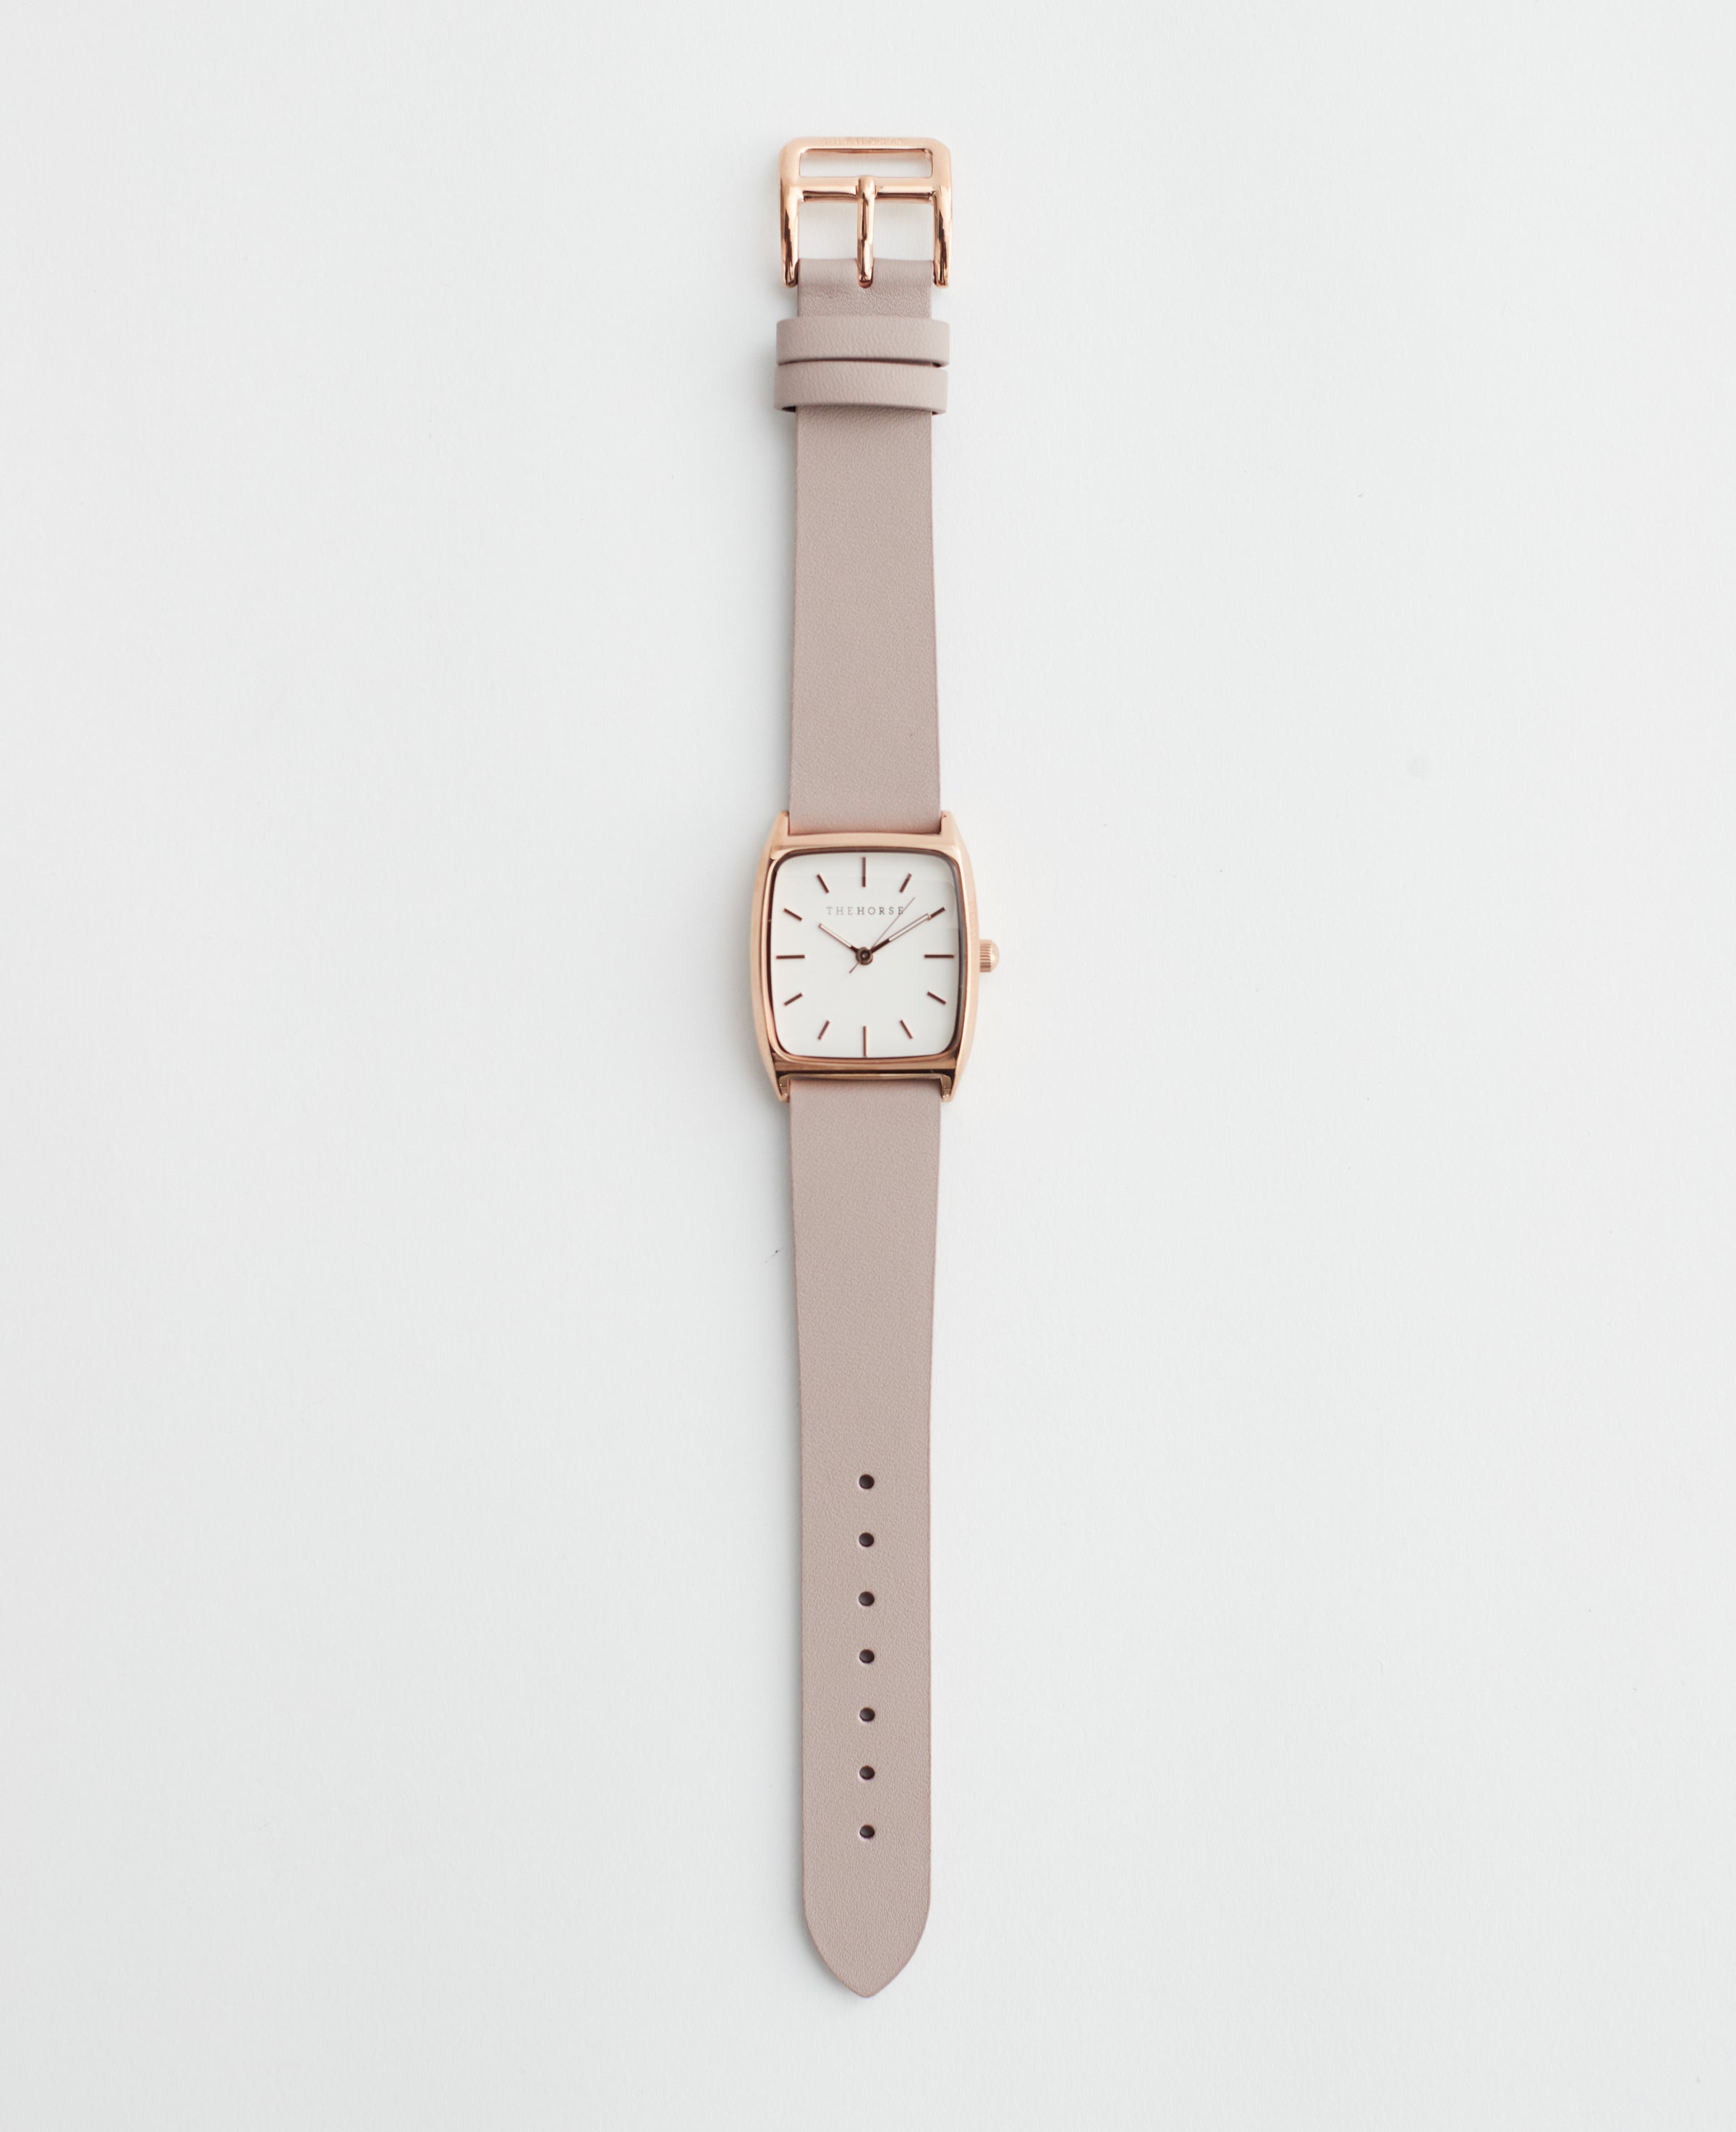 The Dress Watch: Rose Gold Case / White Dial / Blush Leather Strap by The Horse®